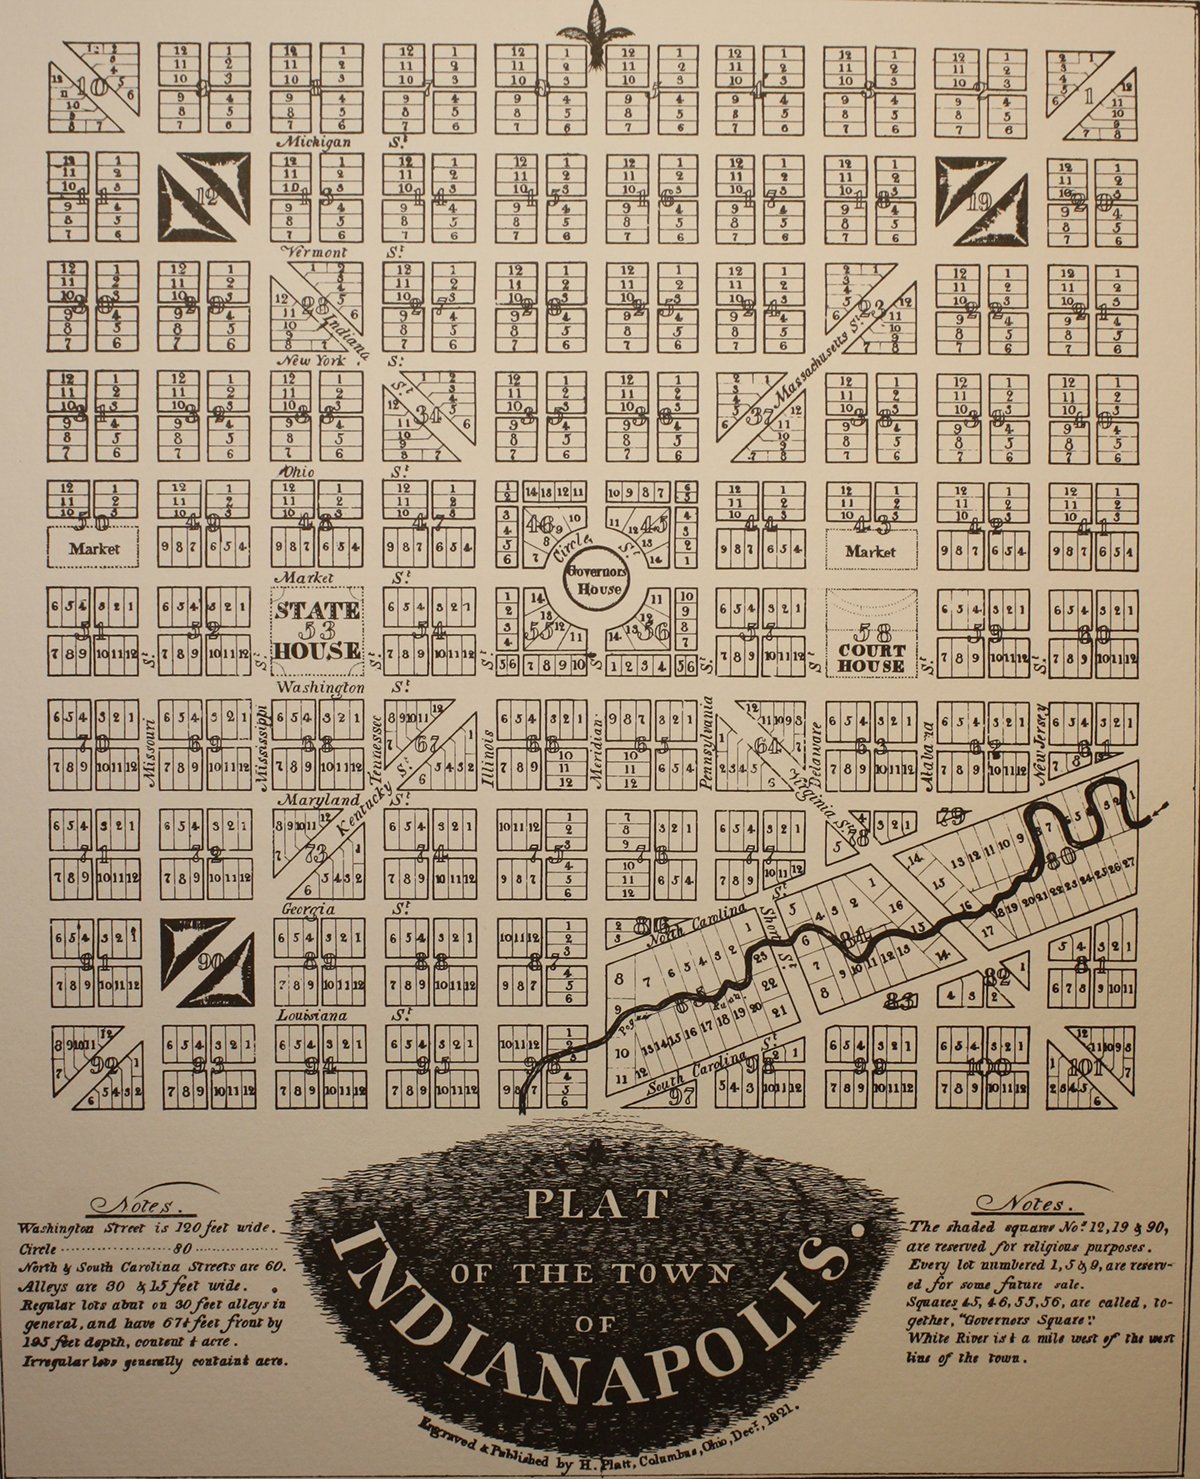 Ralston’s Plat for the Mile Square Plan of Indianapolis, 1821